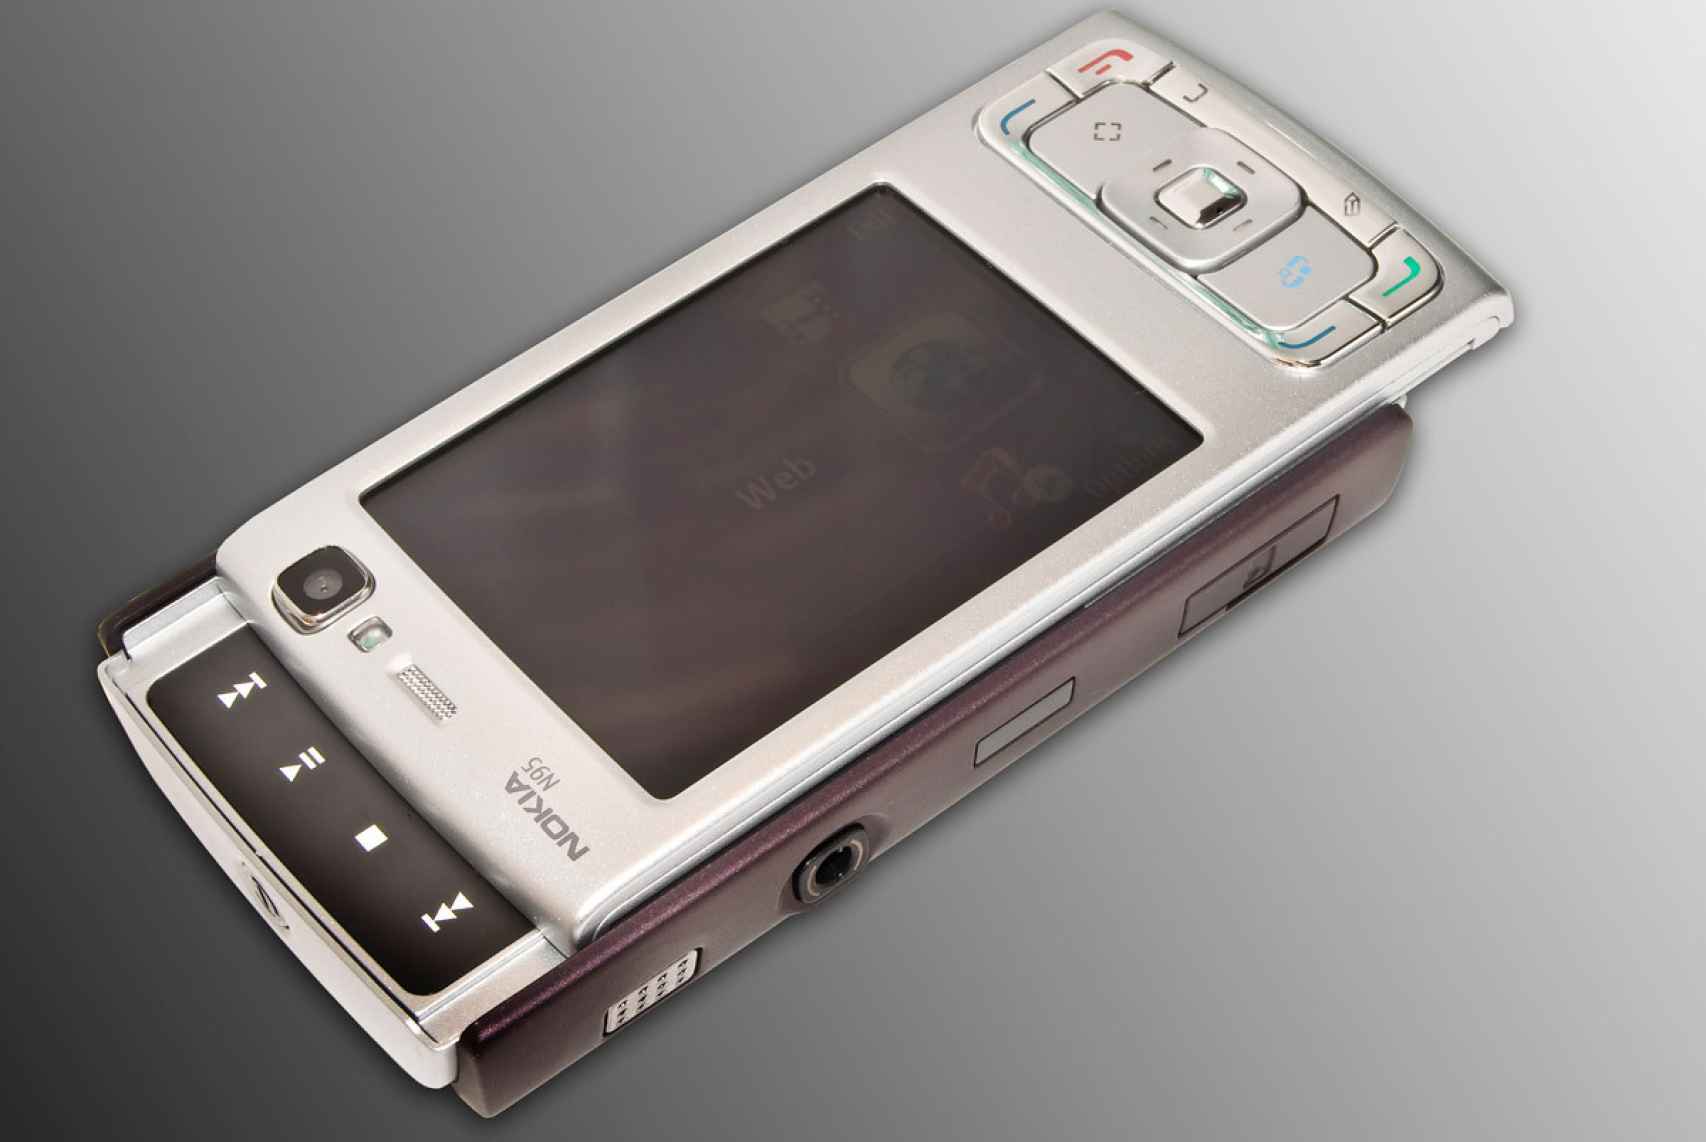 The history of the Nokia N95 as the perfect mobile or the time I was most wrong